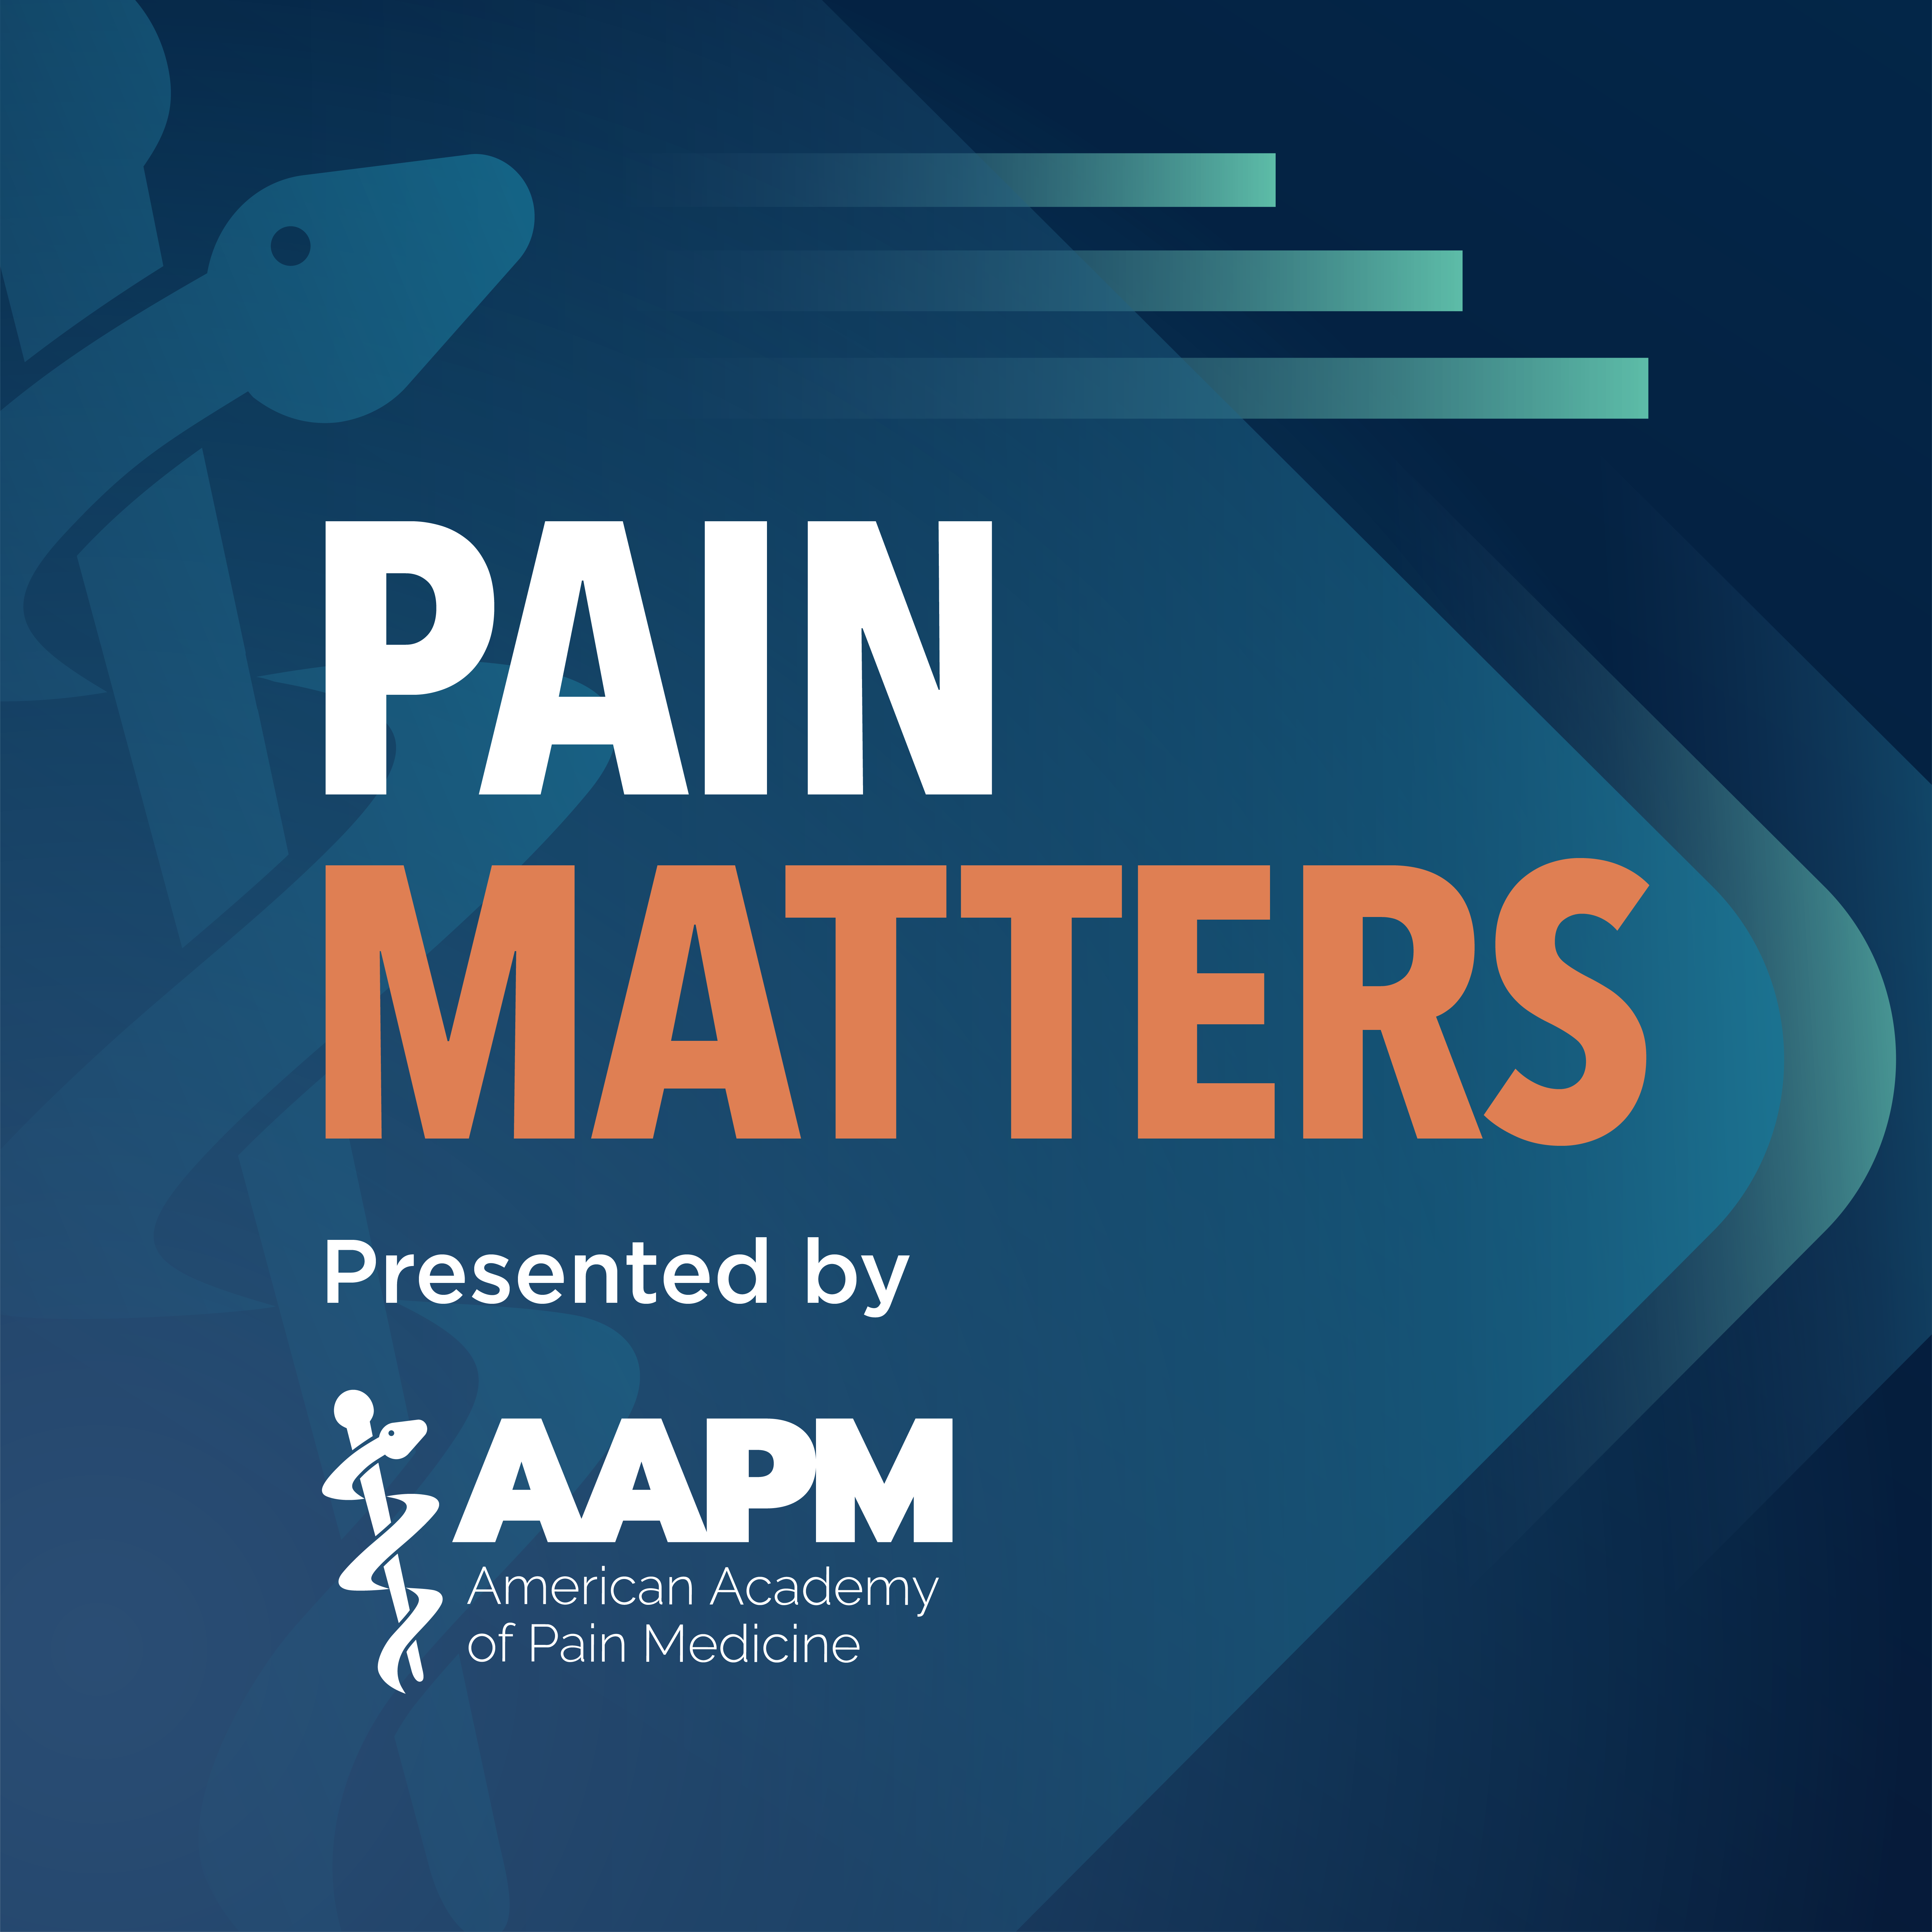 Pain Matters Podcast Presented by AAPM (American Academy of Pain Medicine)